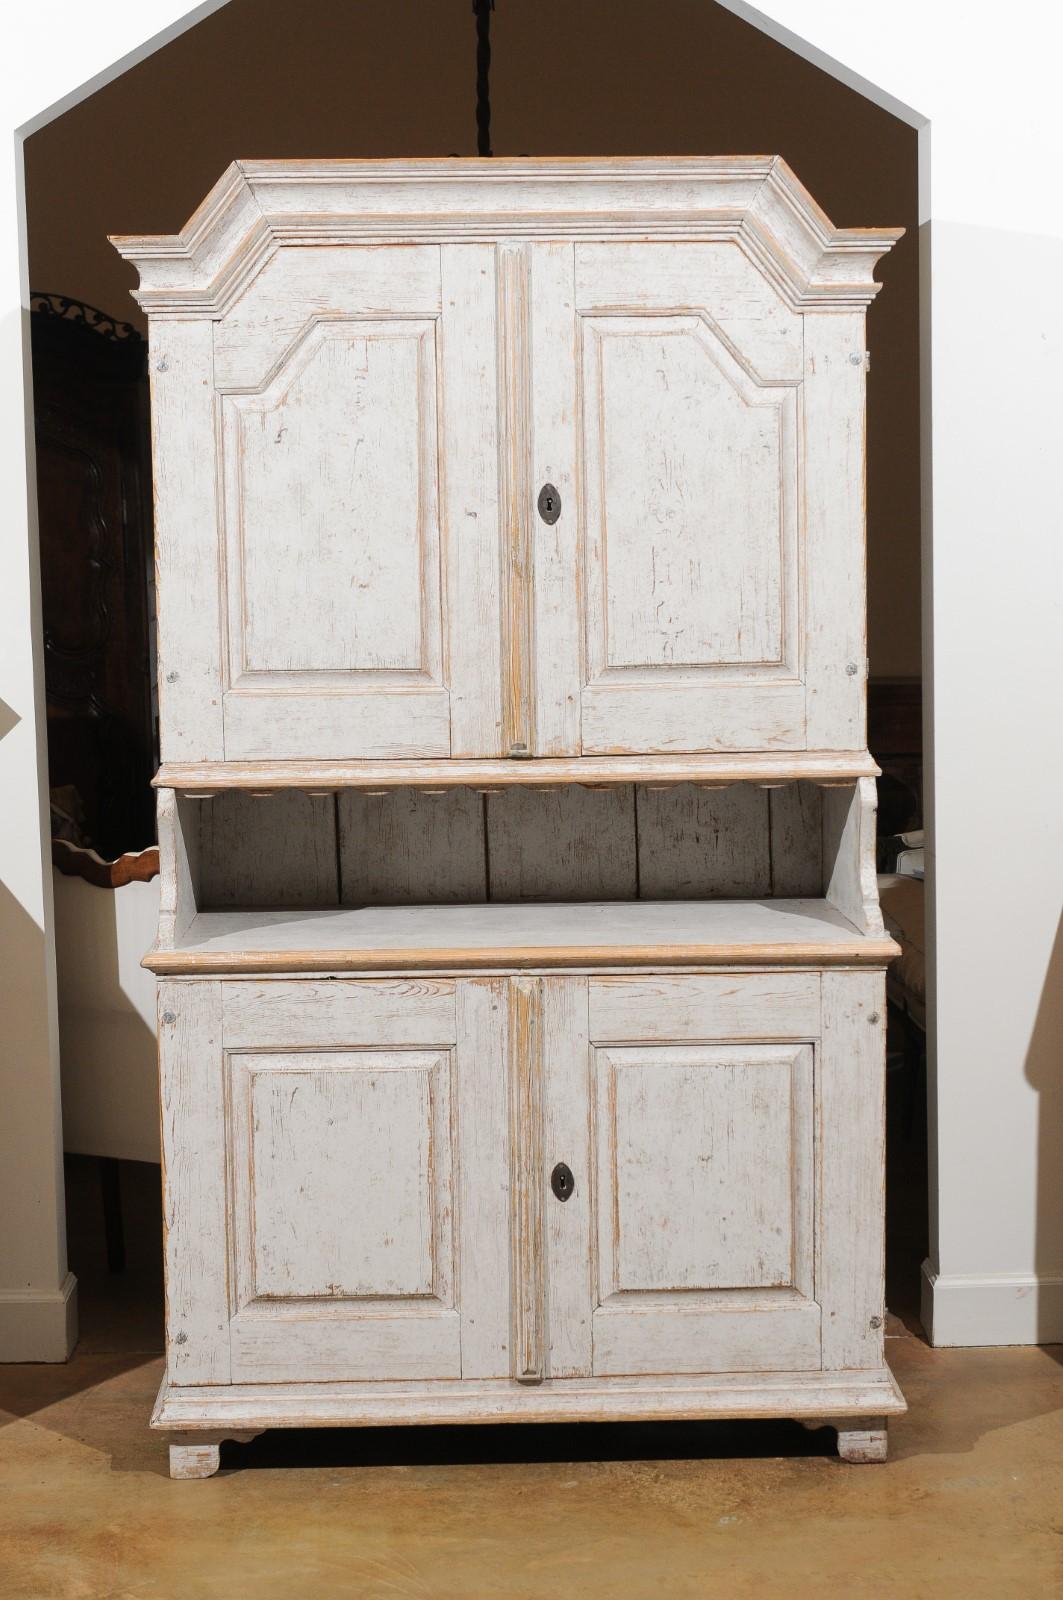 A Swedish mid-19th century two-part painted cabinet from the west-central province of Värmland, with broken pediment and four doors. Created in Sweden circa 1834, this tall painted two-part cabinet attracts our attention with its large broken